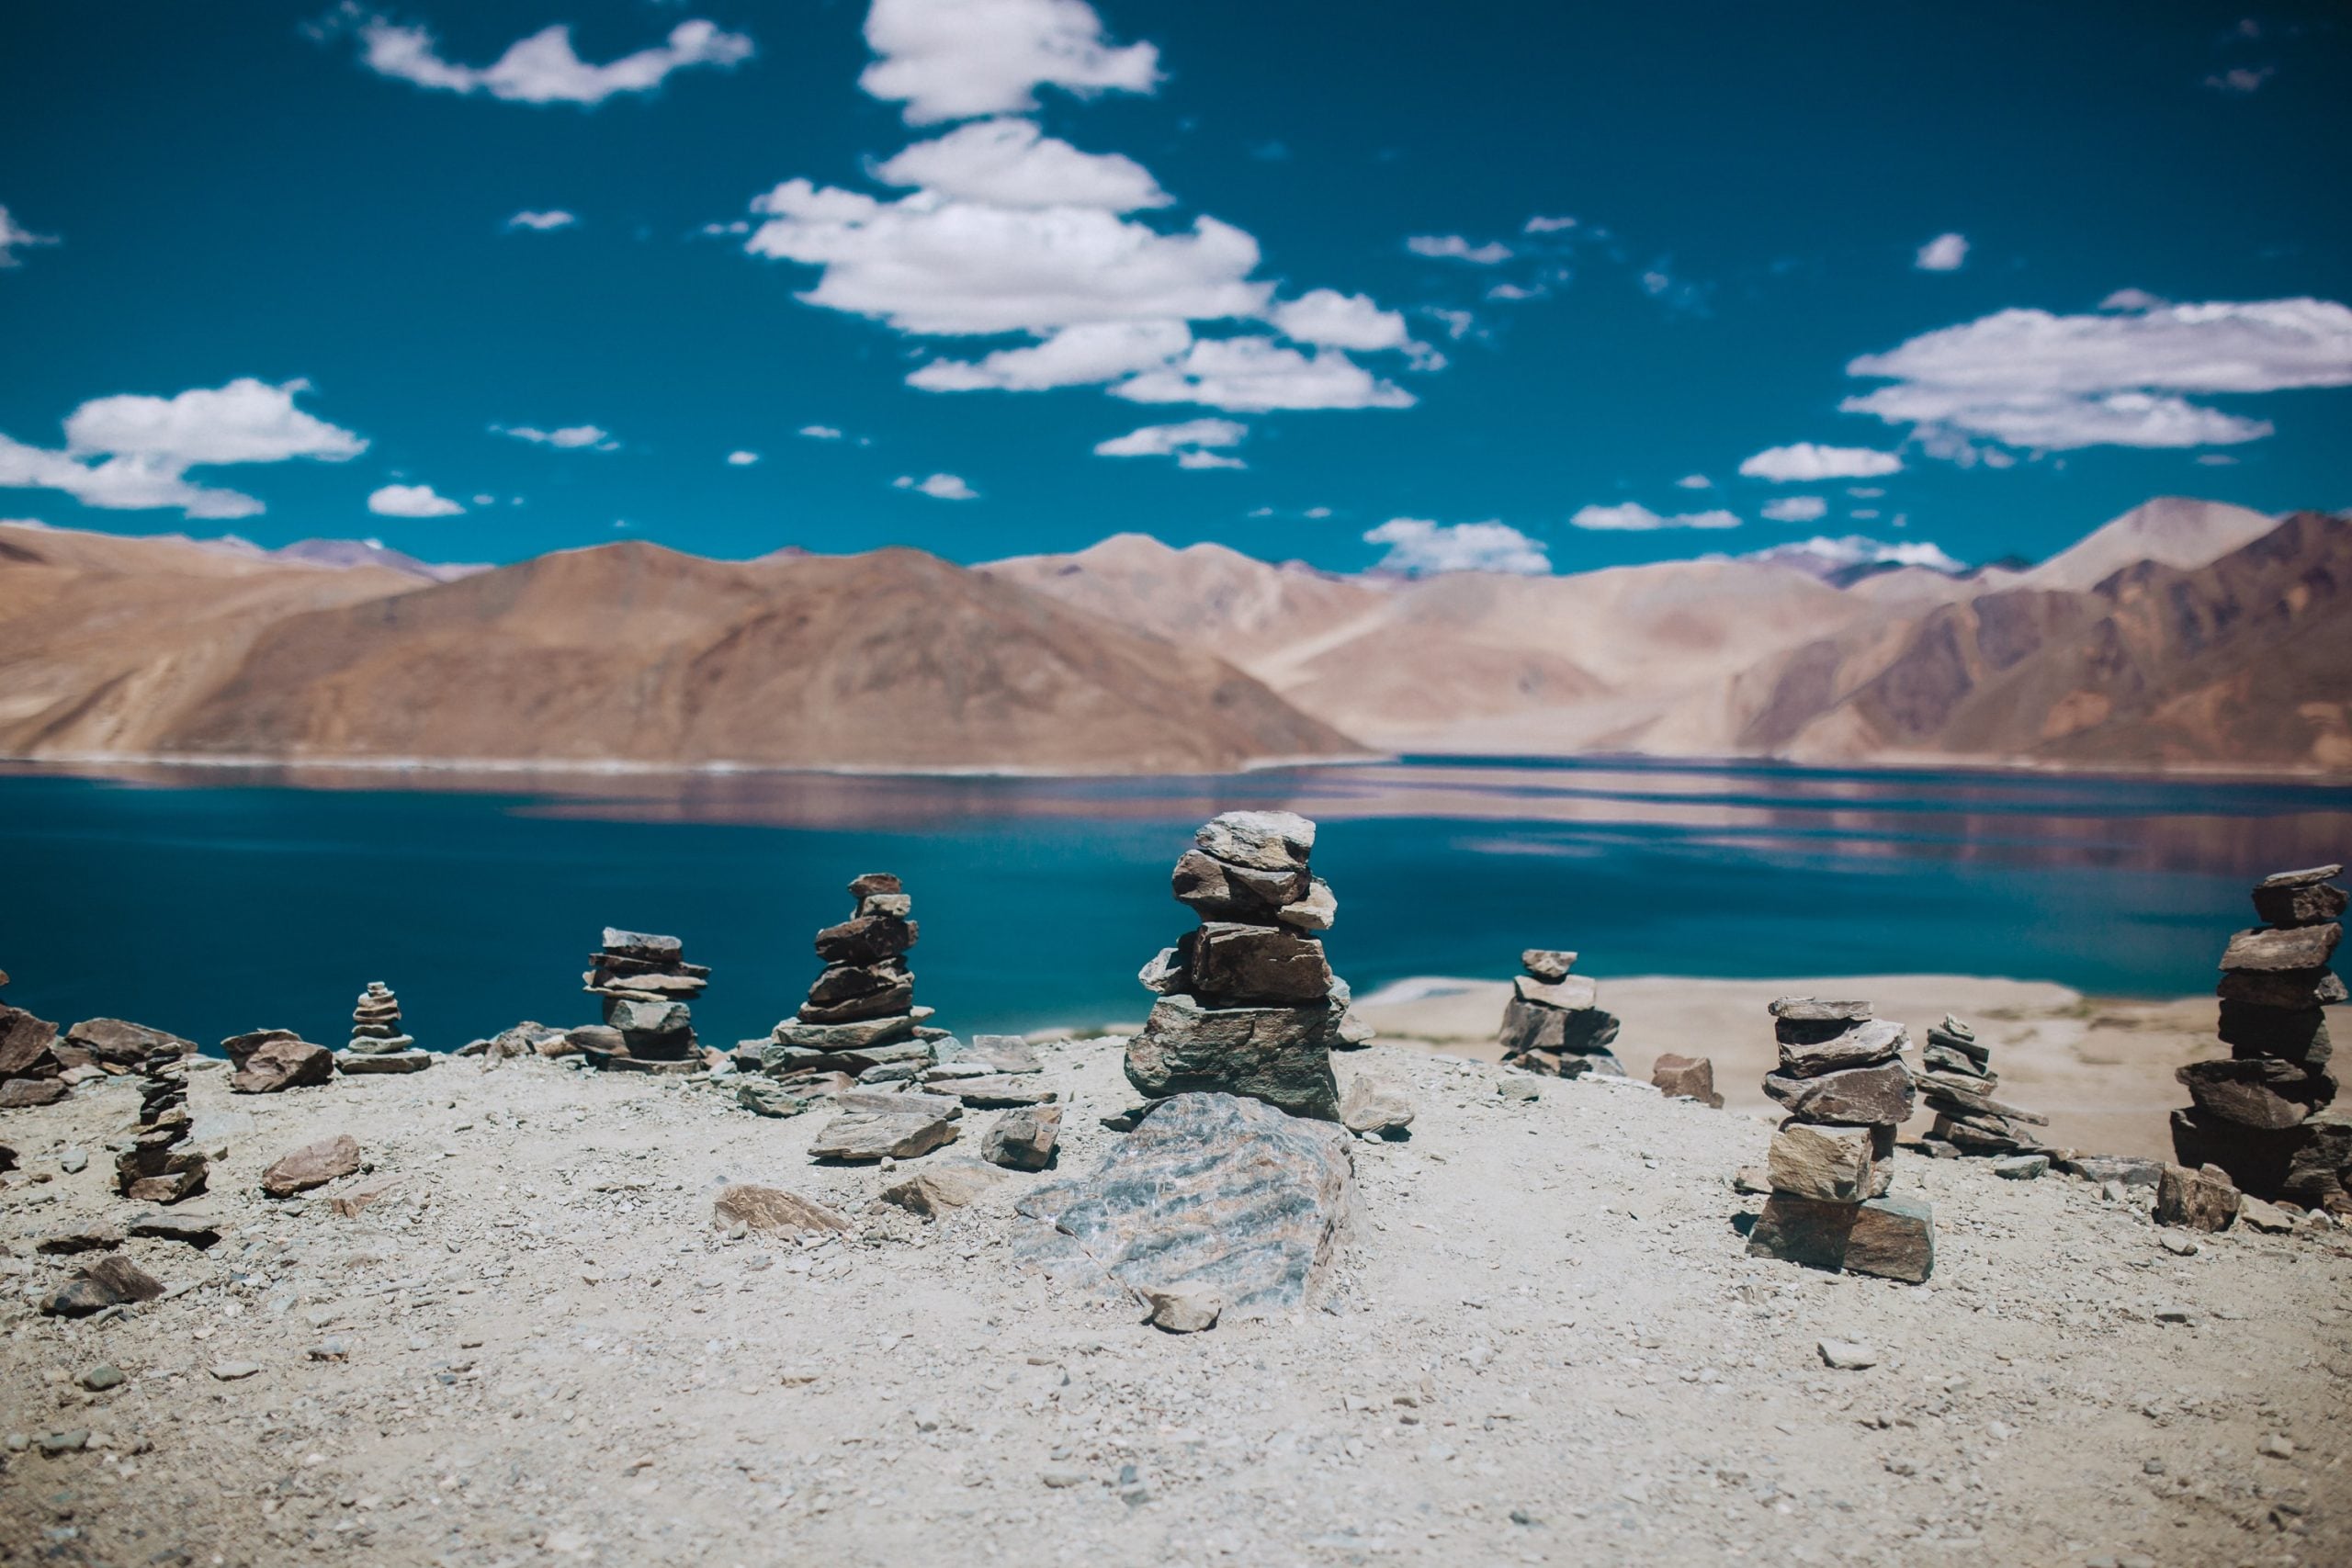 Ladakh is the largest union territory of India as per area scaled